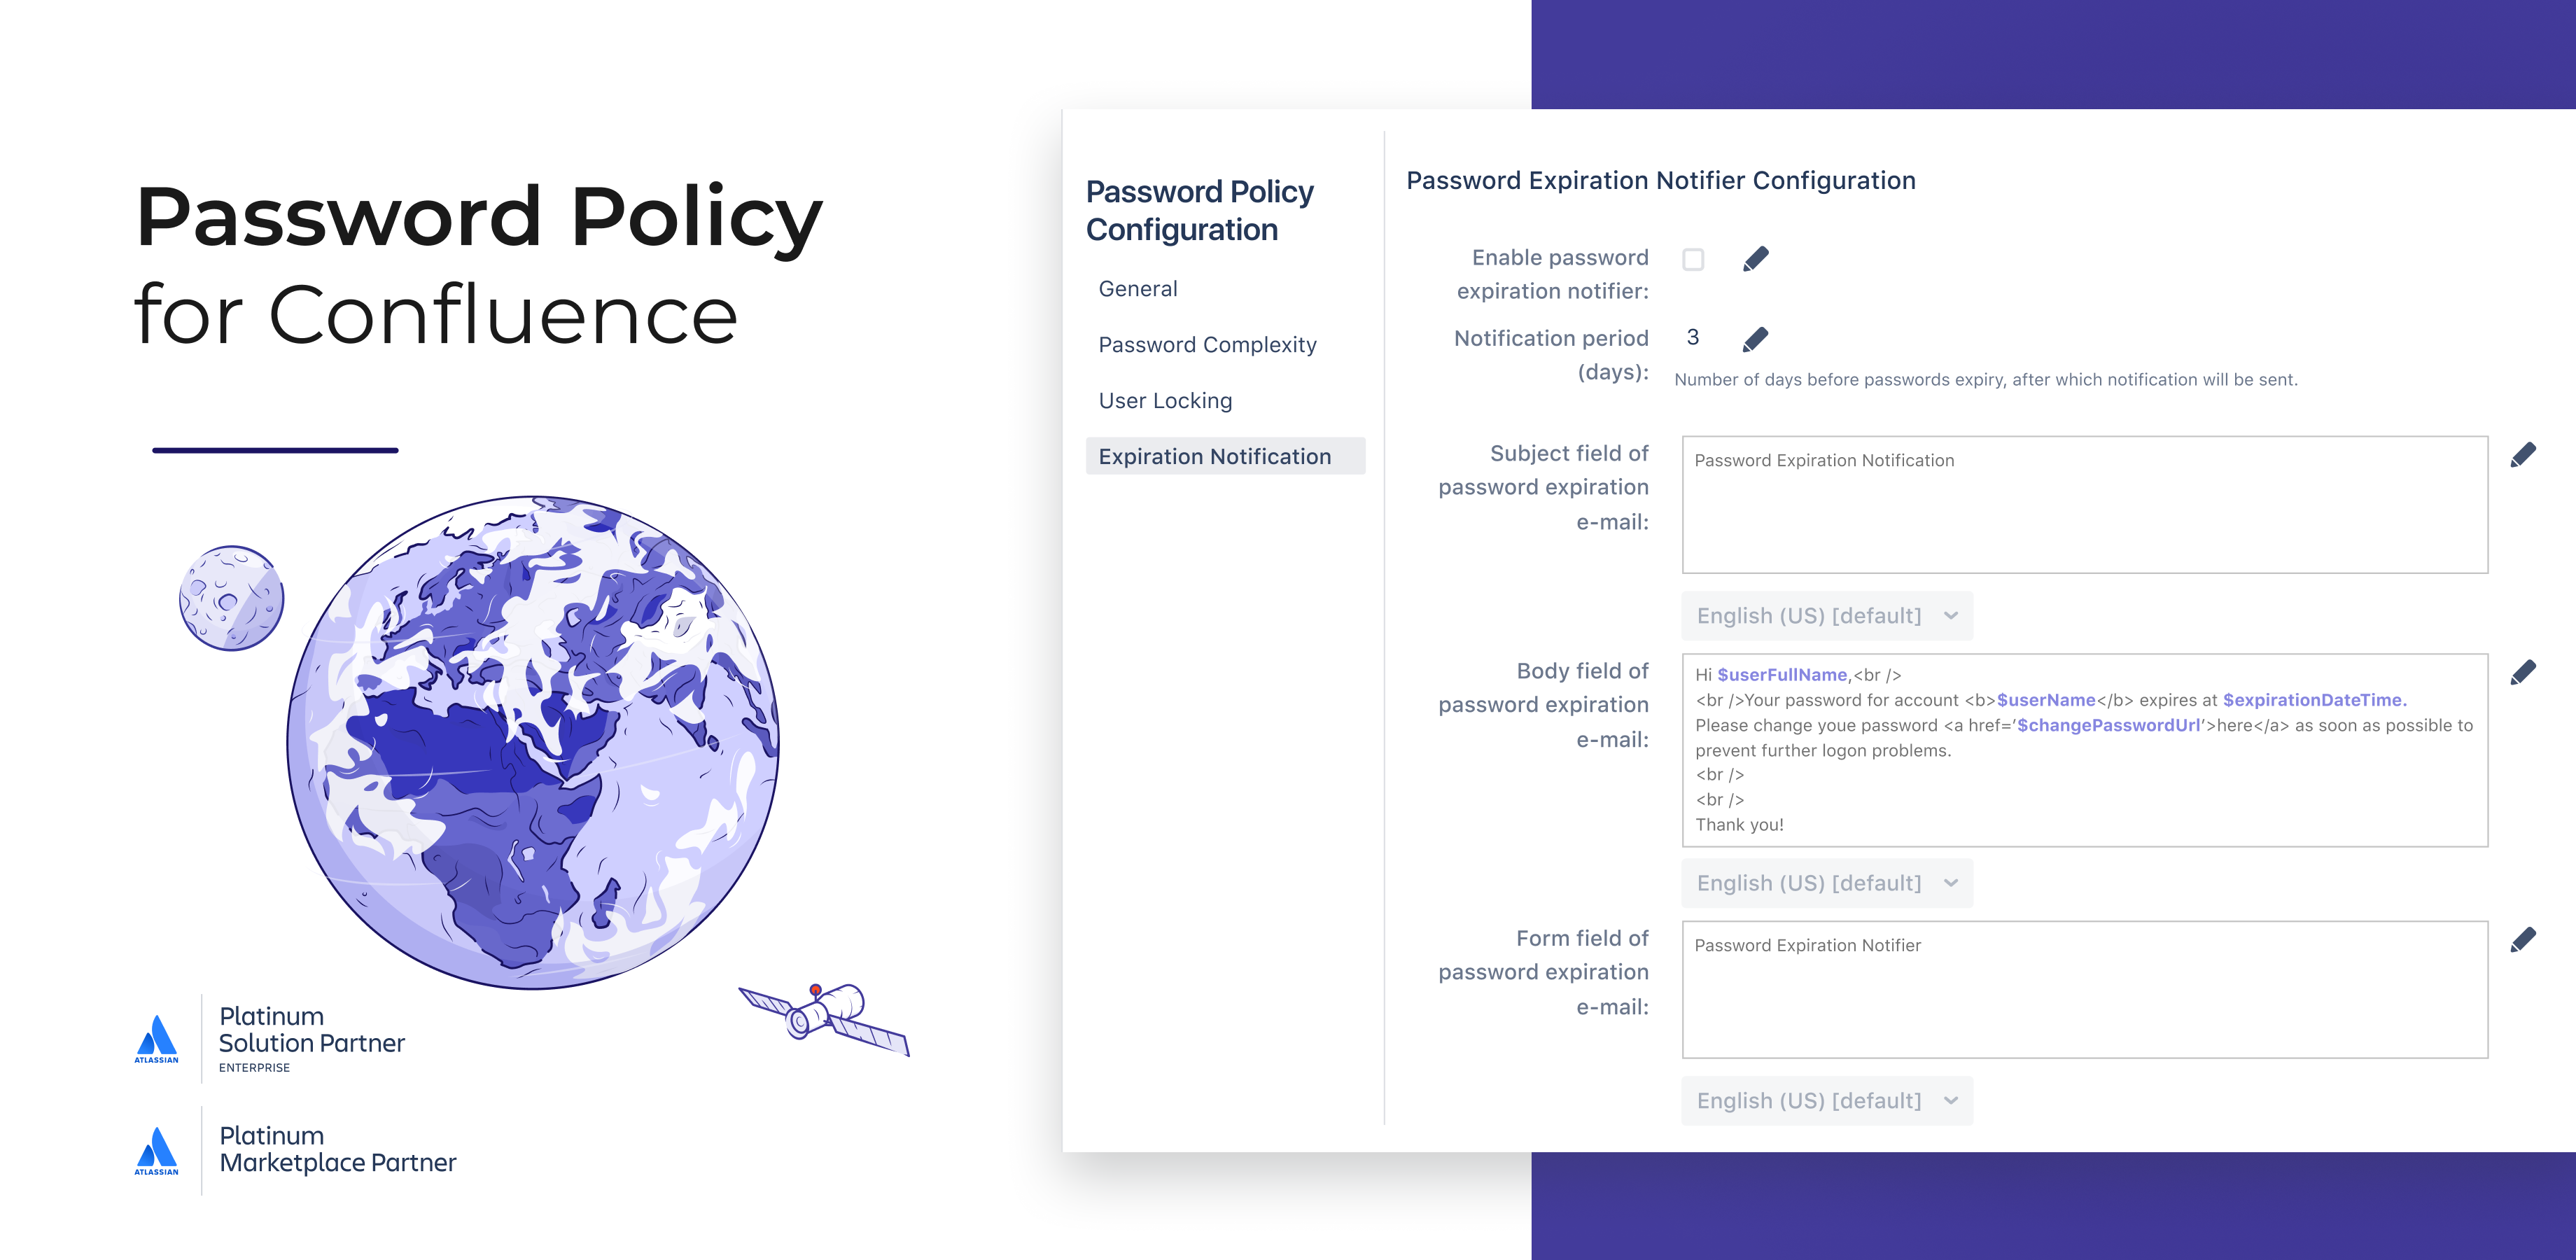 Enterprise Password Policy for Confluence - Improved password security and compliance in Jira and Confluence